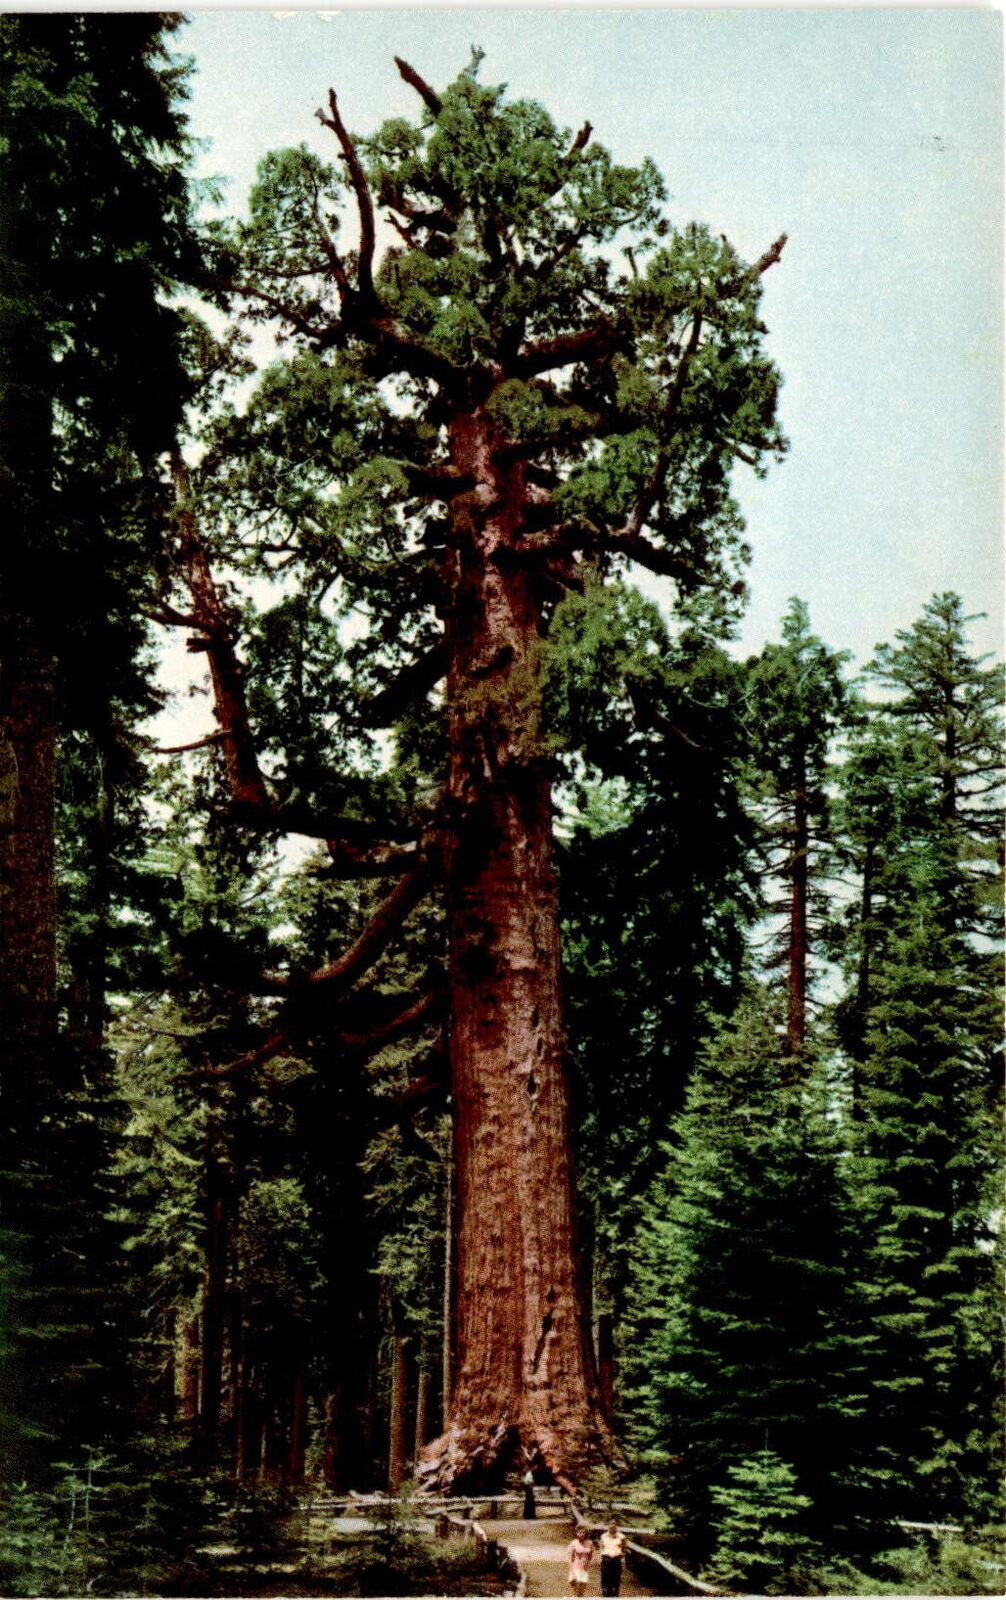 Grizzly Giant, Mariposa Grove, Big Trees, Yosemite National Park, Postcard